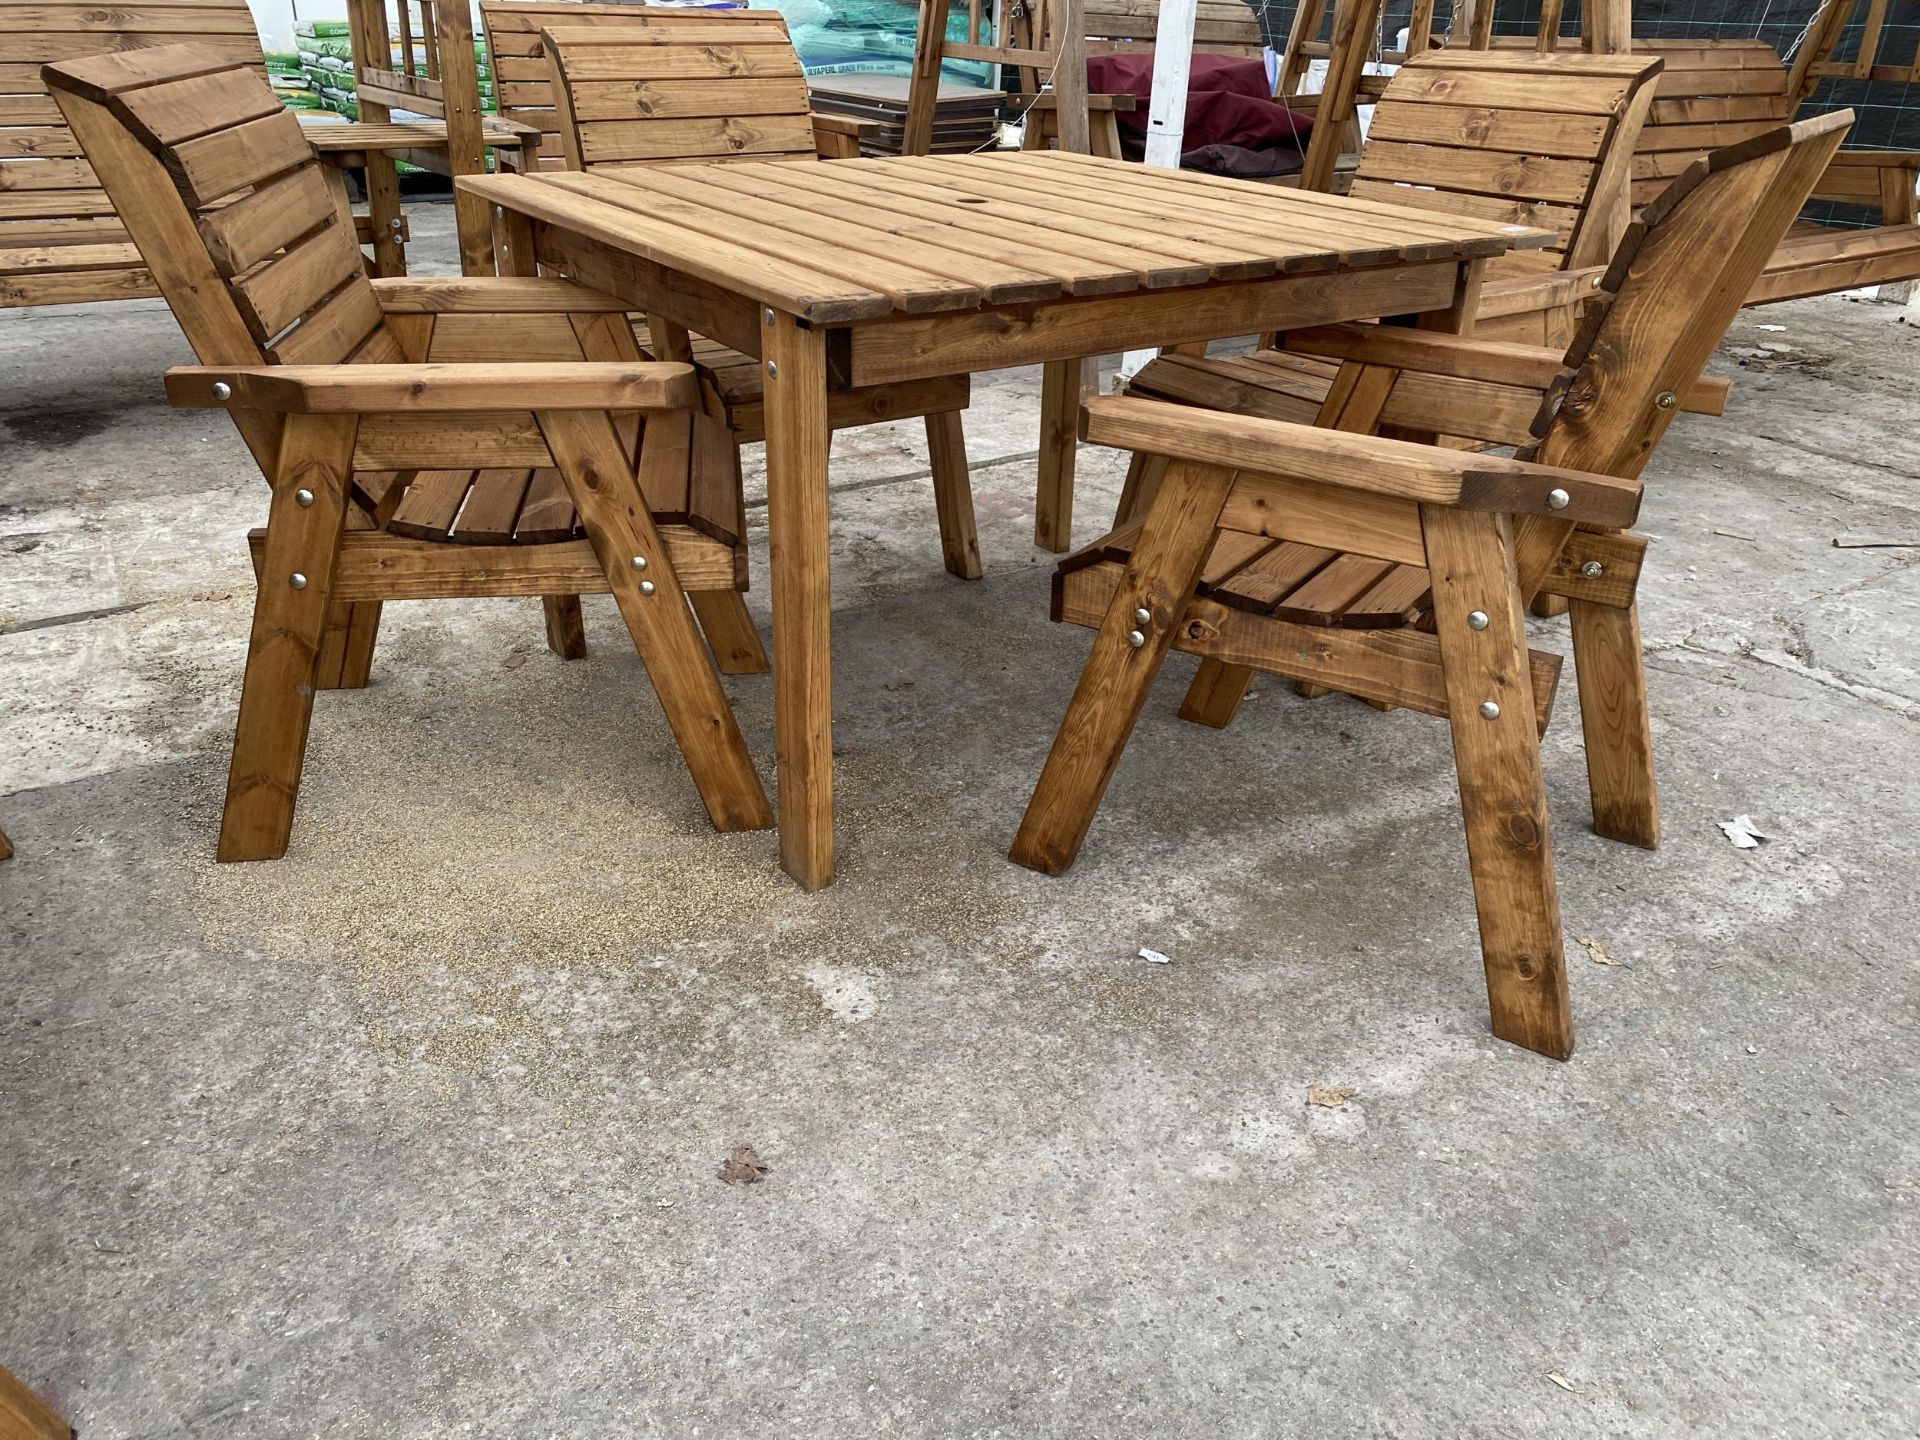 AN AS NEW EX DISPLAY CHARLES TAYLOR PATIO FURNITURE SET COMPRISING OF A SQUARE TABLE AND FOUR CHAIRS - Image 2 of 2